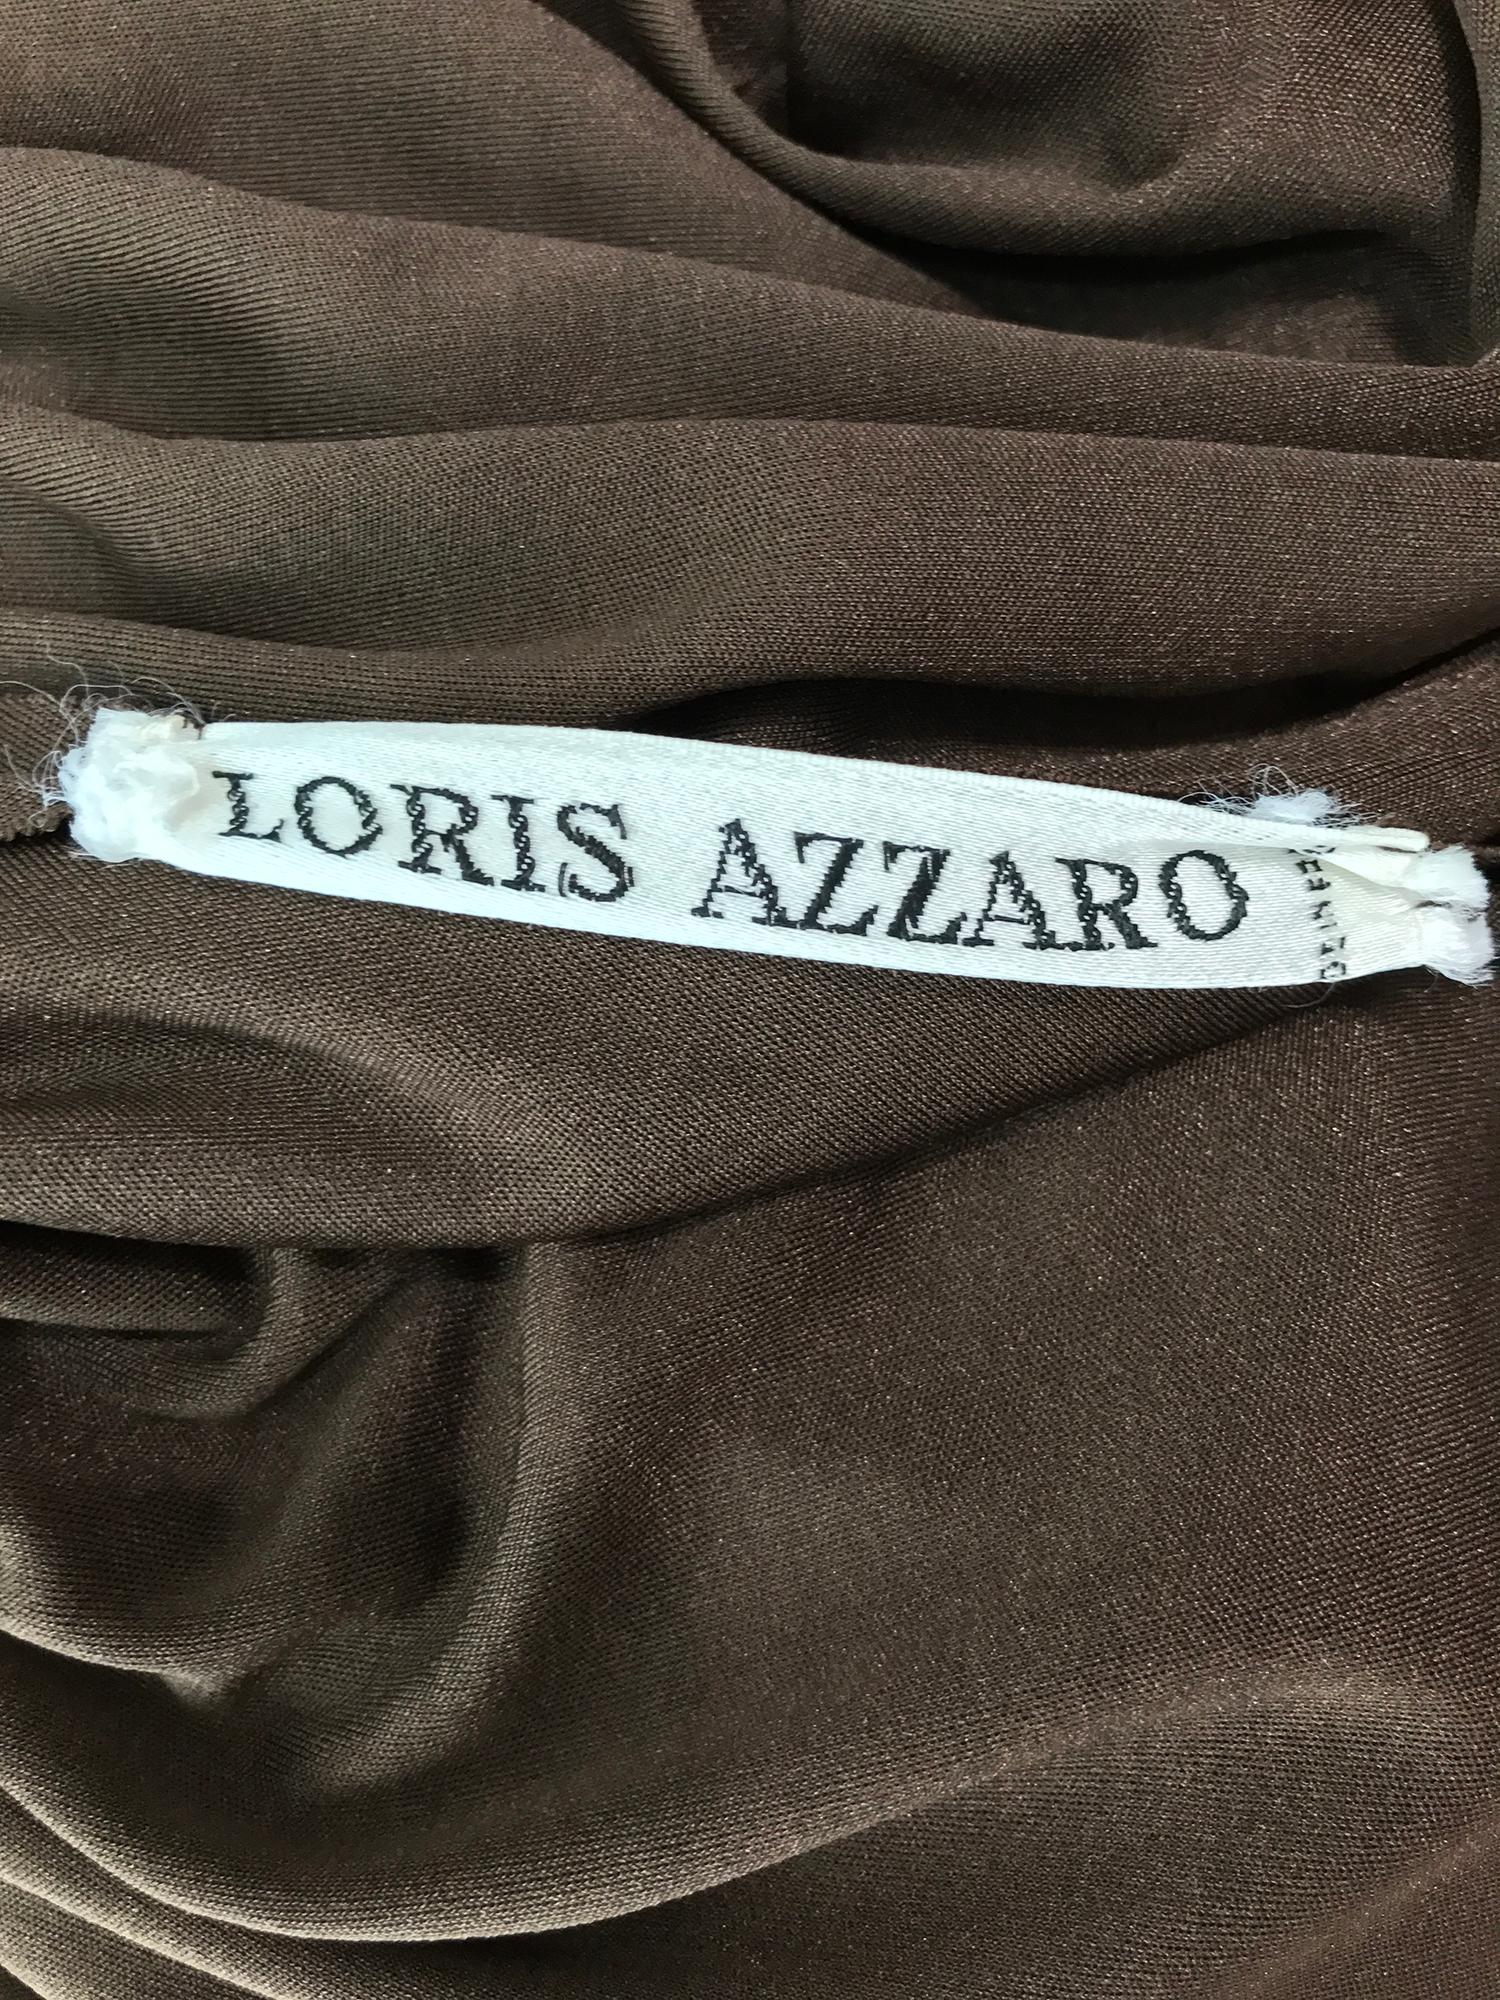 Loris Azzaro Couture Chocolate Brown Silky Jersey Full Length Hooded Cape 1970s For Sale 3